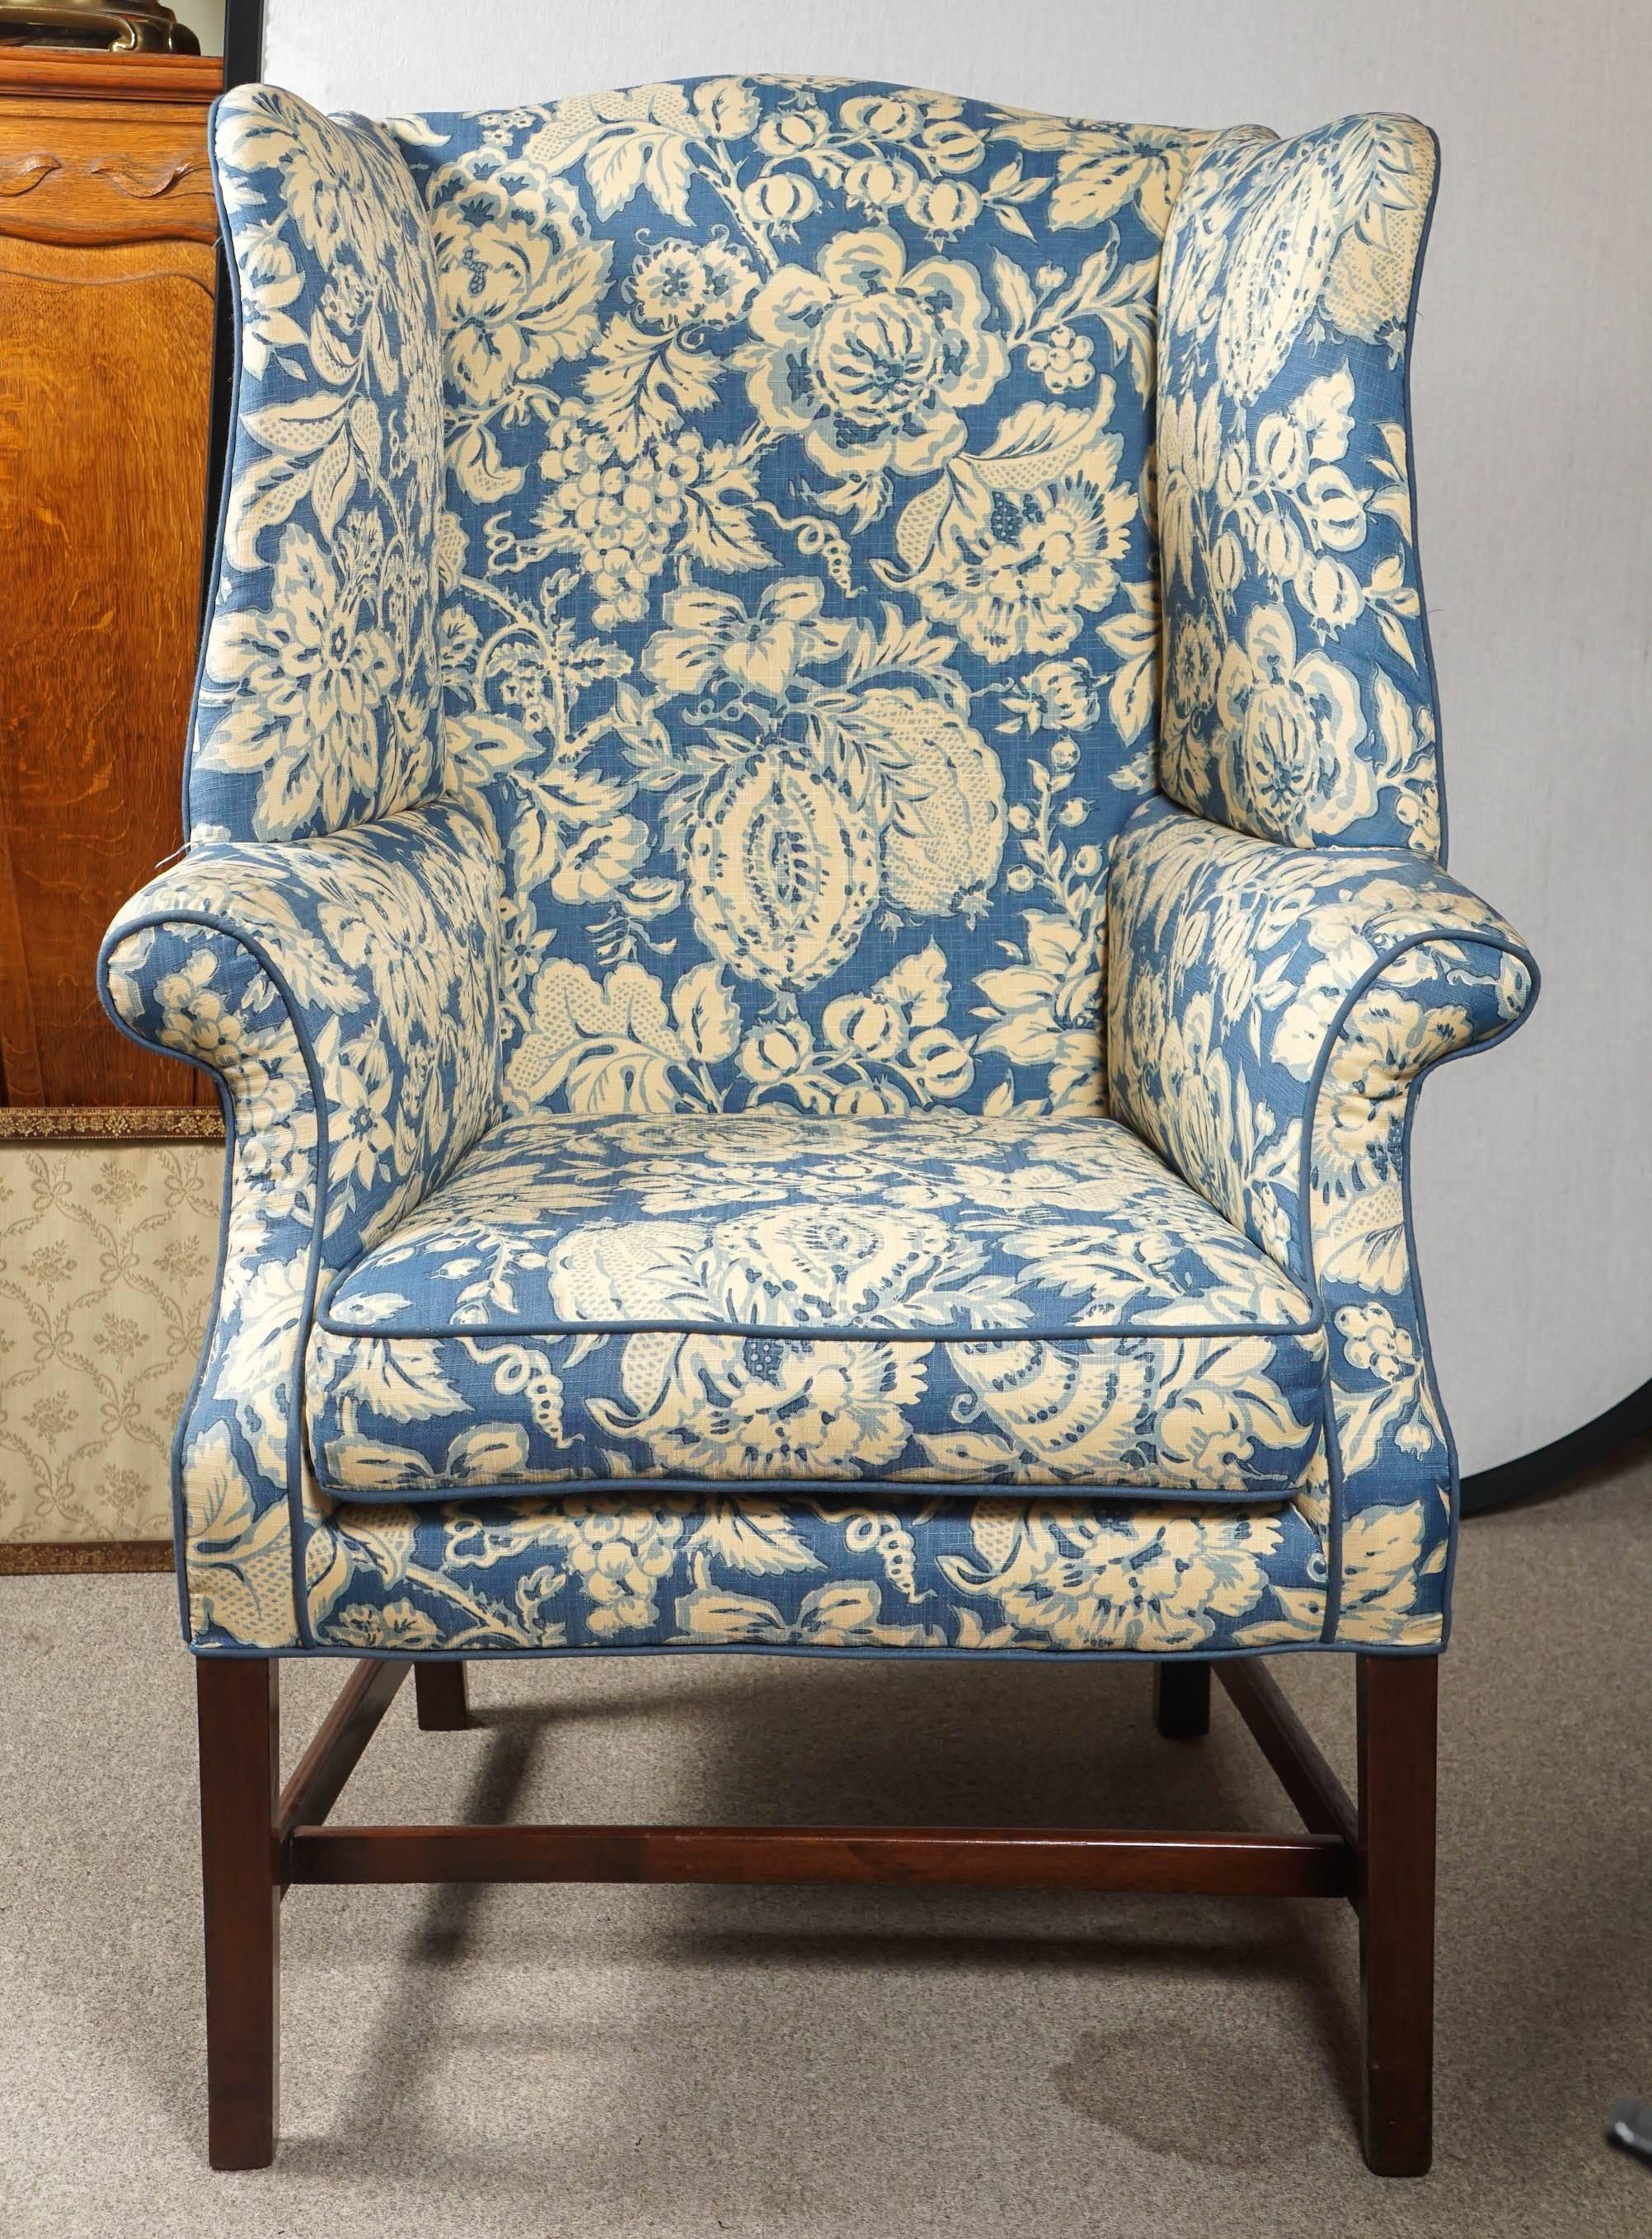 George III wingback chair. Newly upholstered cotton print. 

Measure: 46.5